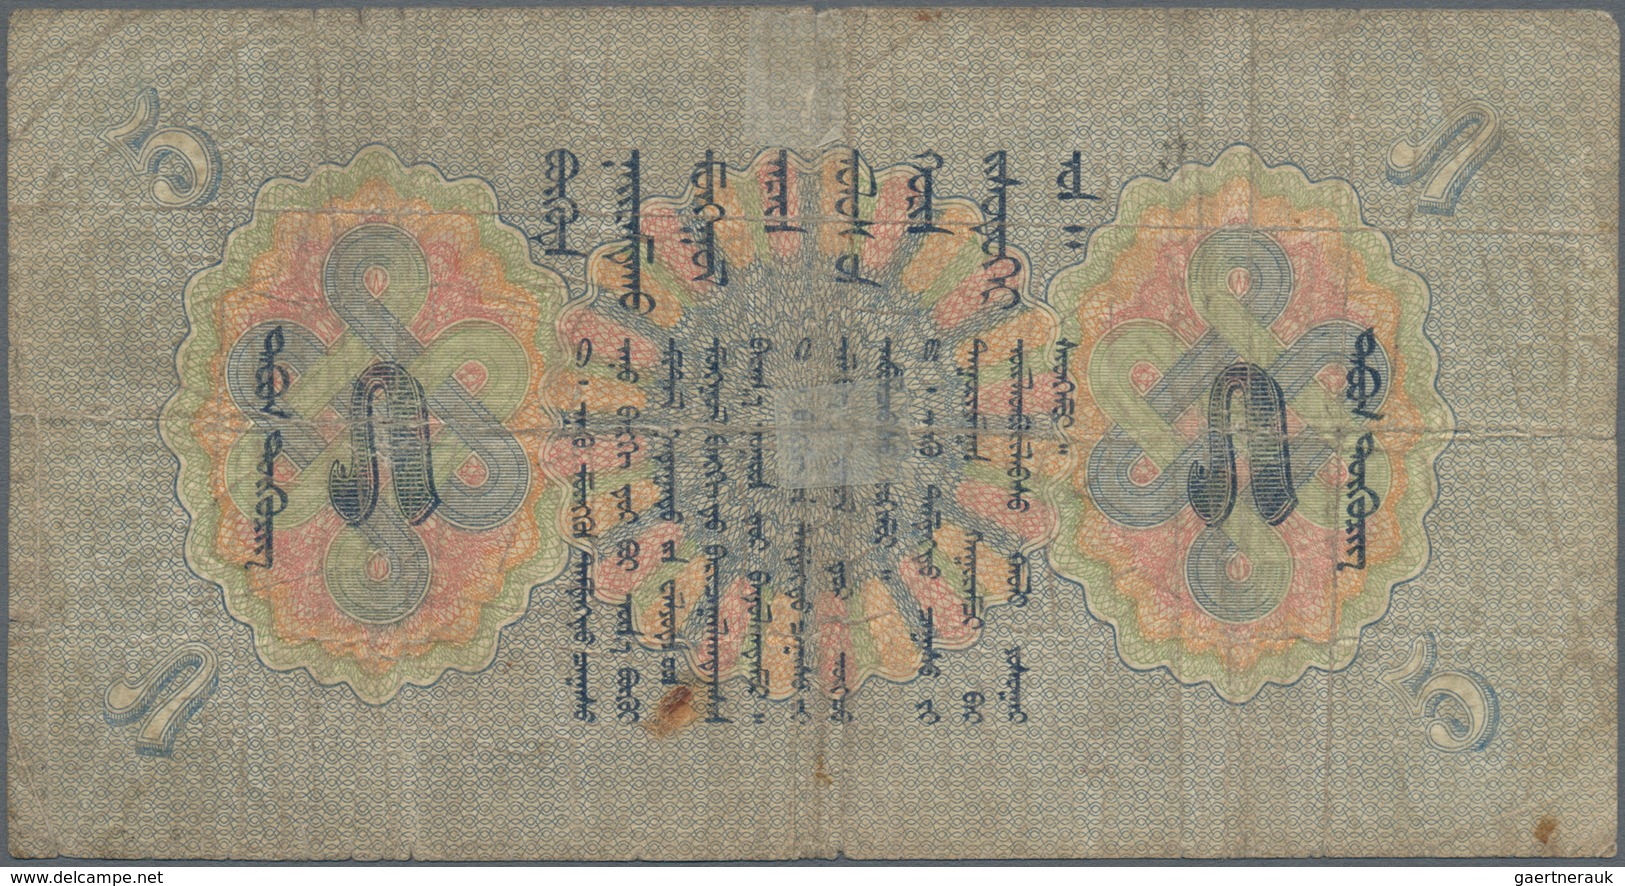 Mongolia / Mongolei: 5 Tugrik 1939, P.16, Rare And Seldom Offered With Stained Paper, Several Folds - Mongolei